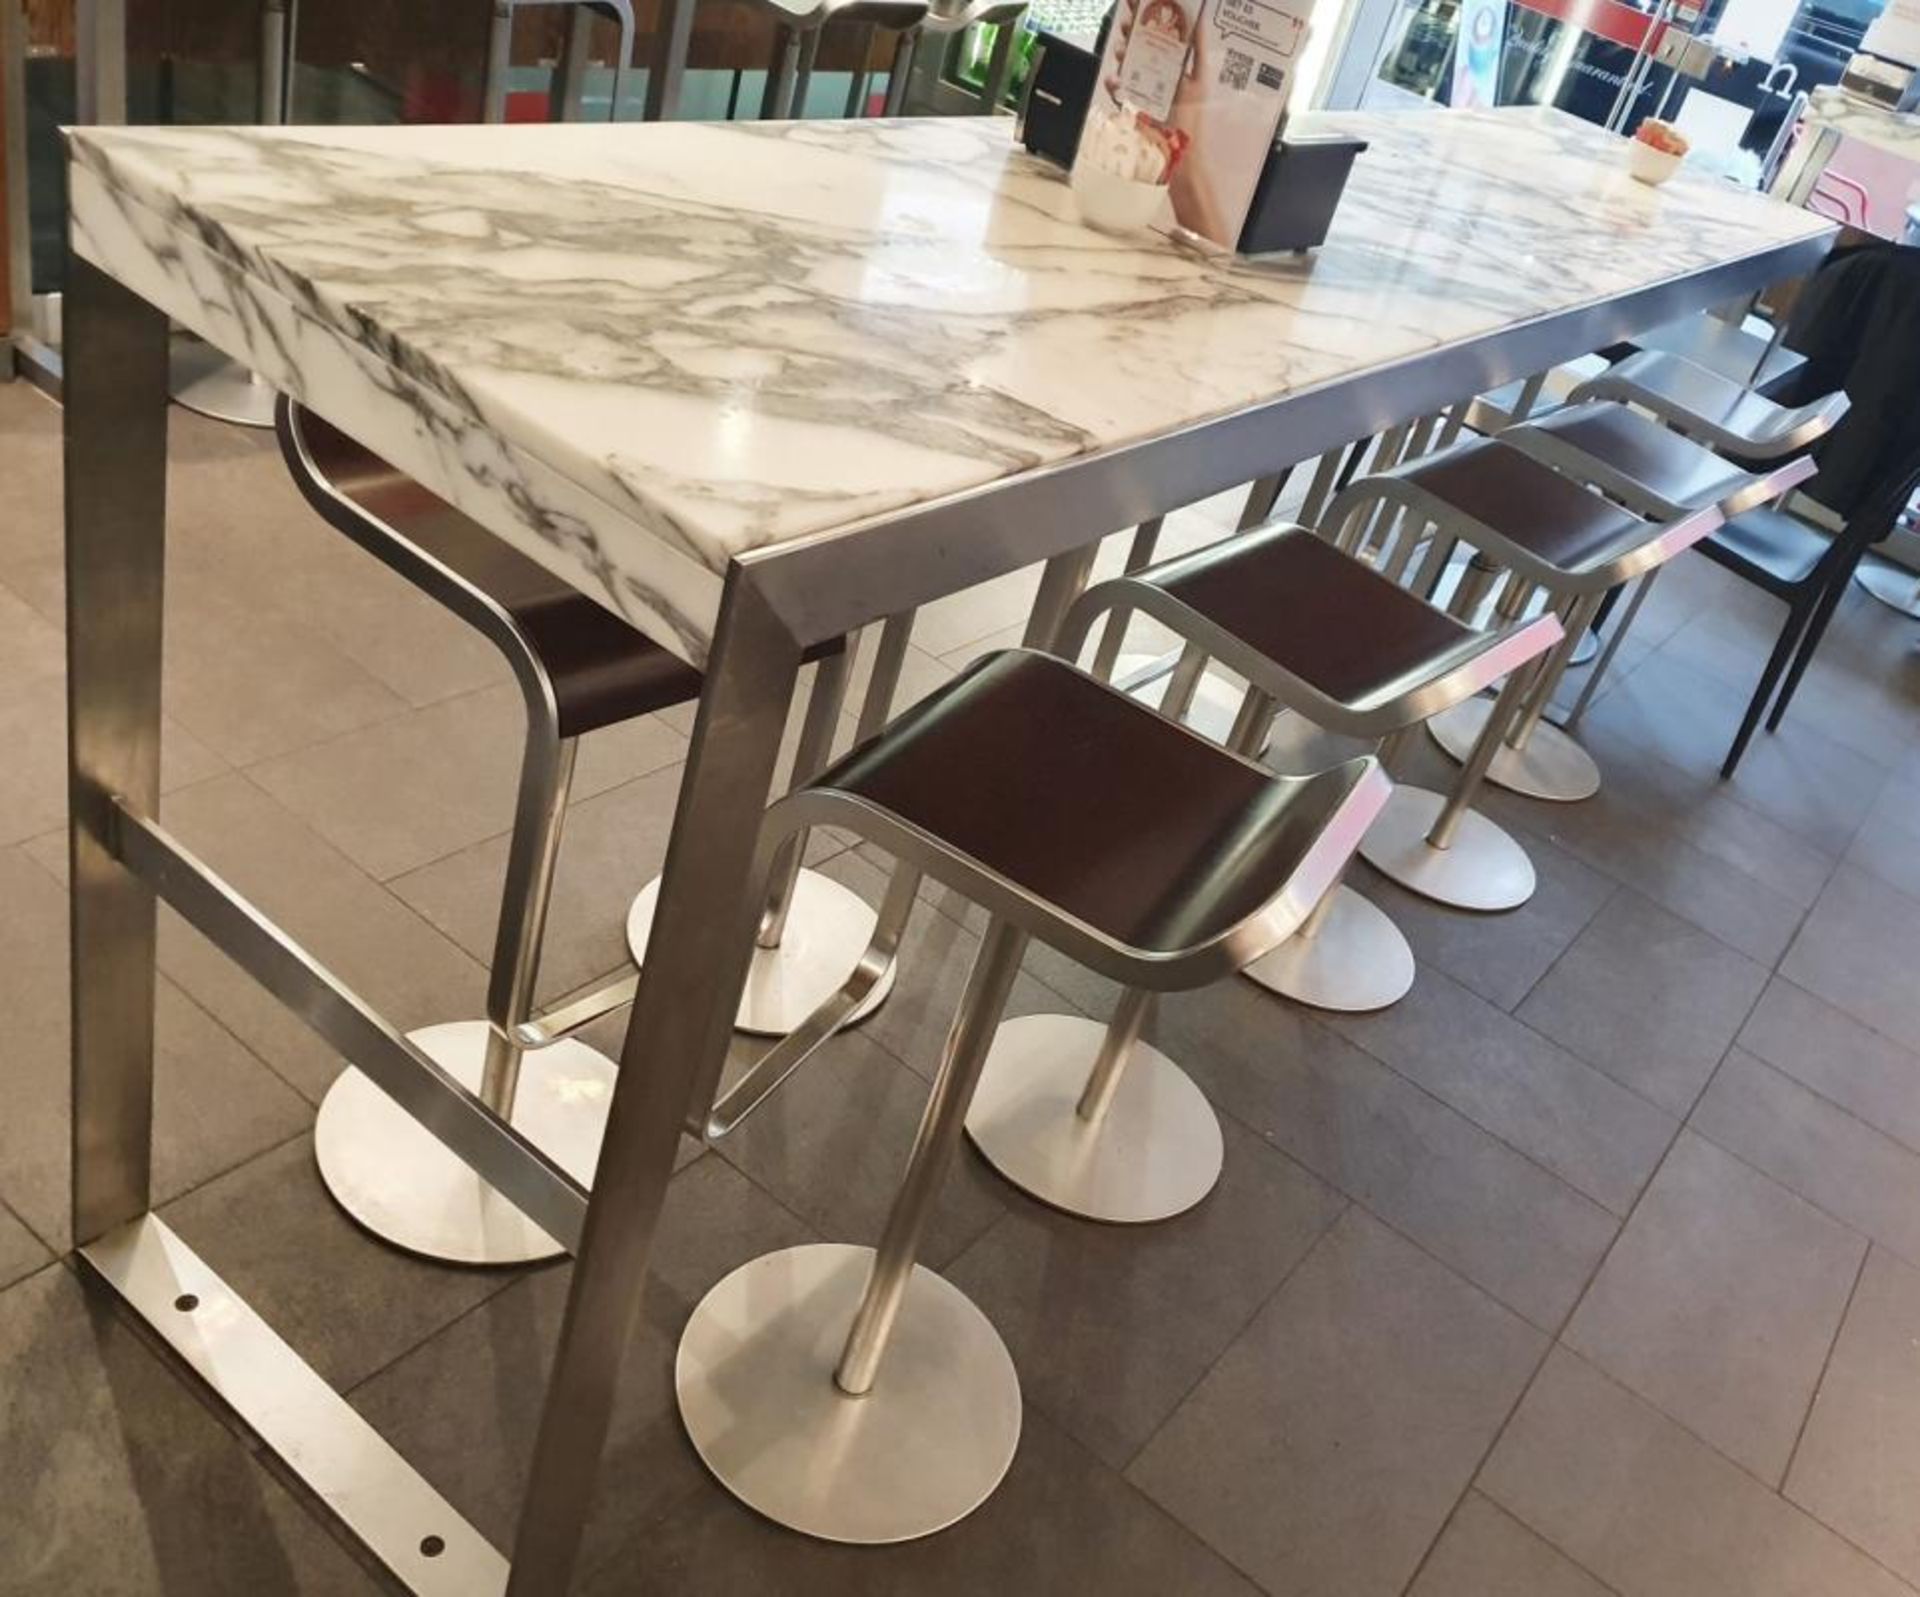 1 x White Marble/Granite Topped Cocktail Table - From A Milan-style City Centre Cafe - Bild 4 aus 7